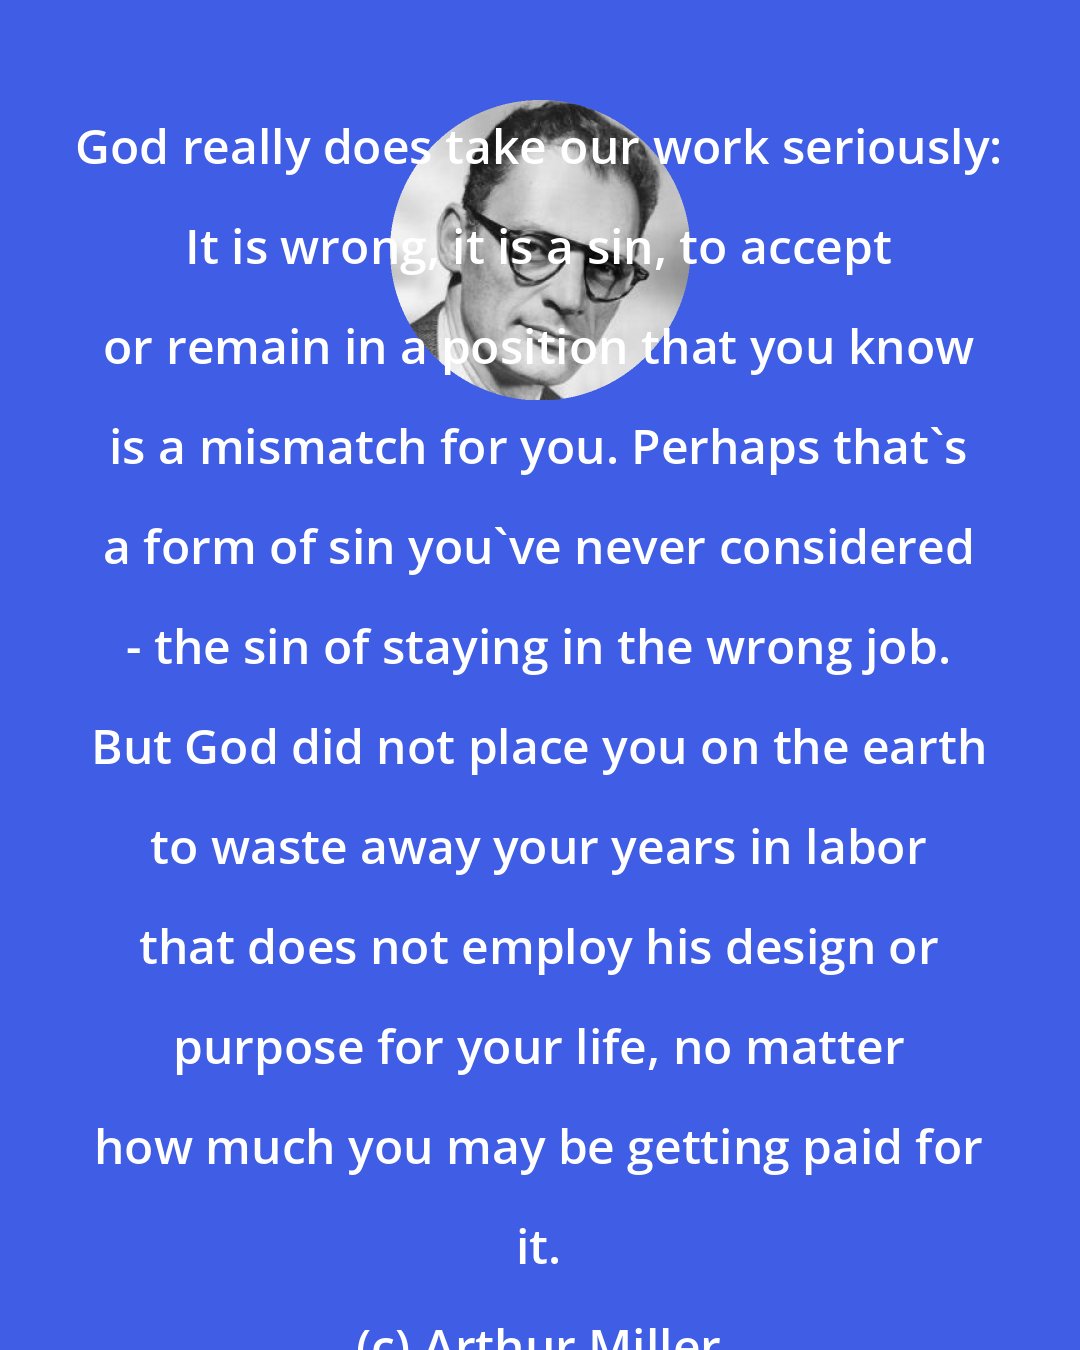 Arthur Miller: God really does take our work seriously: It is wrong, it is a sin, to accept or remain in a position that you know is a mismatch for you. Perhaps that's a form of sin you've never considered - the sin of staying in the wrong job. But God did not place you on the earth to waste away your years in labor that does not employ his design or purpose for your life, no matter how much you may be getting paid for it.